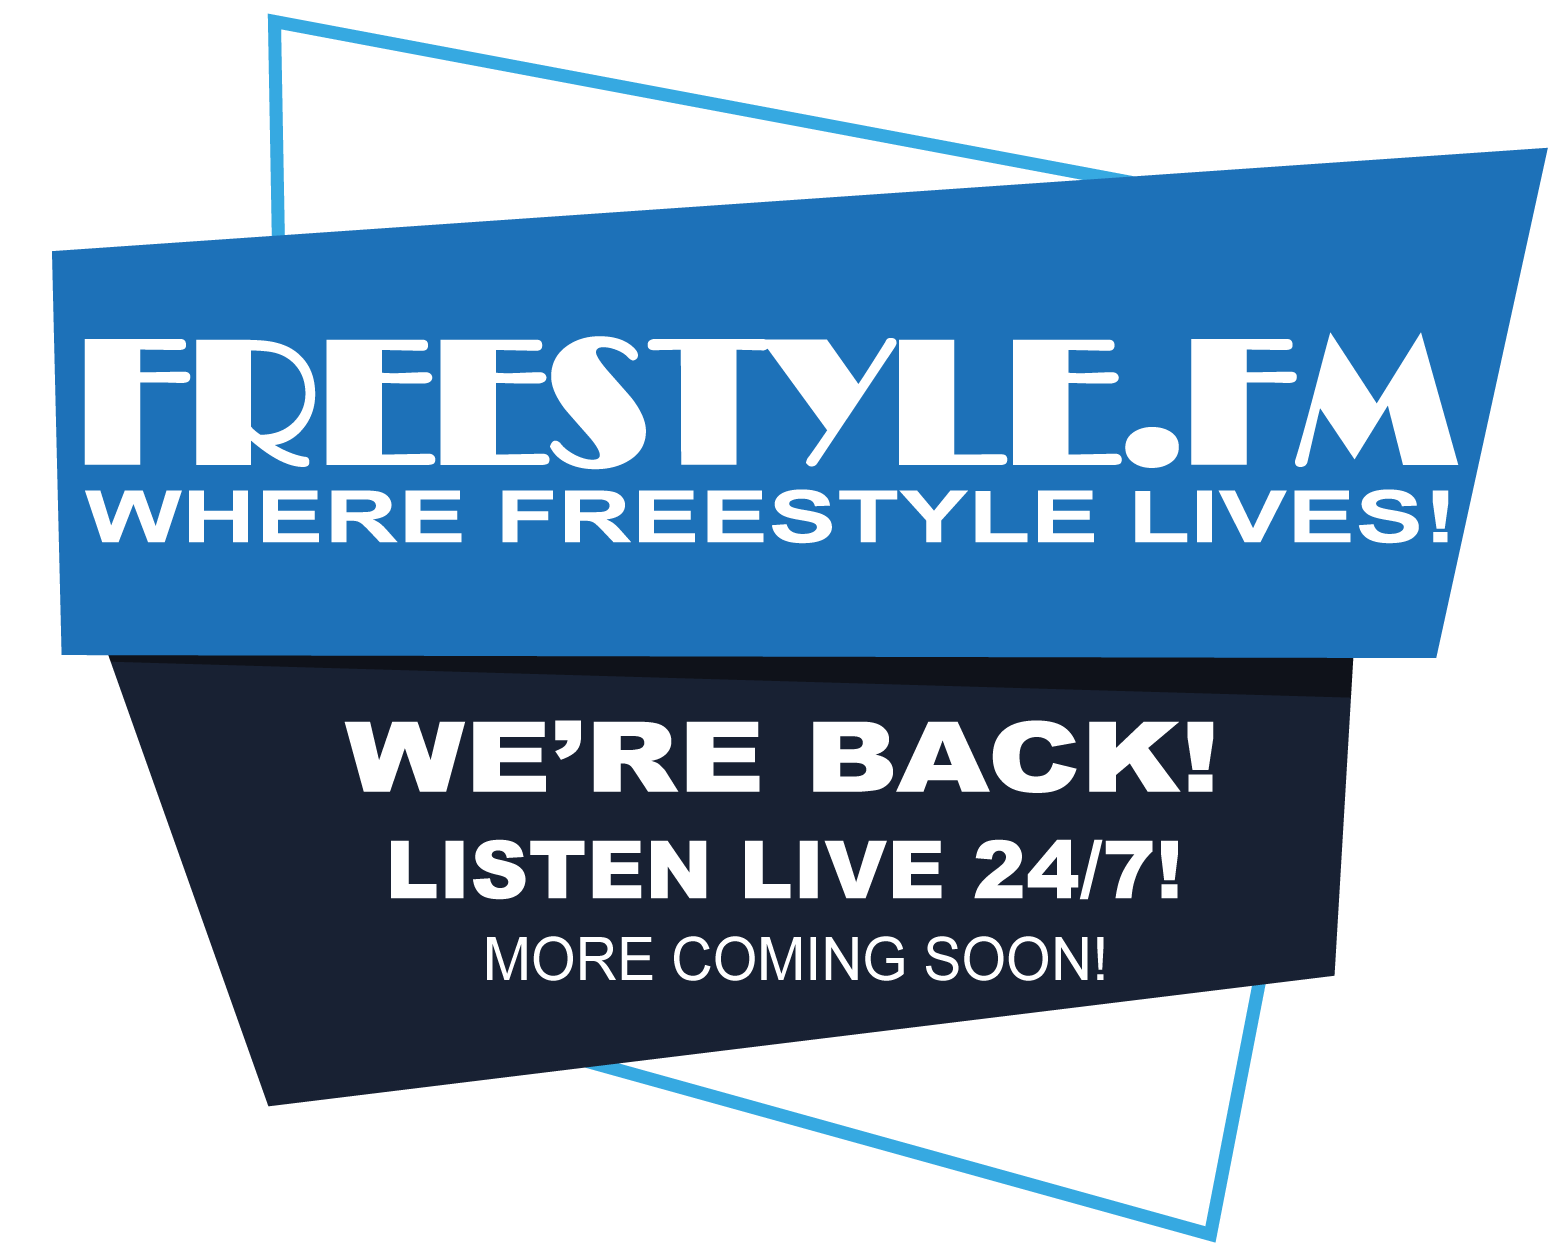 Art for #1 Freestyle Station by Freestyle.FM